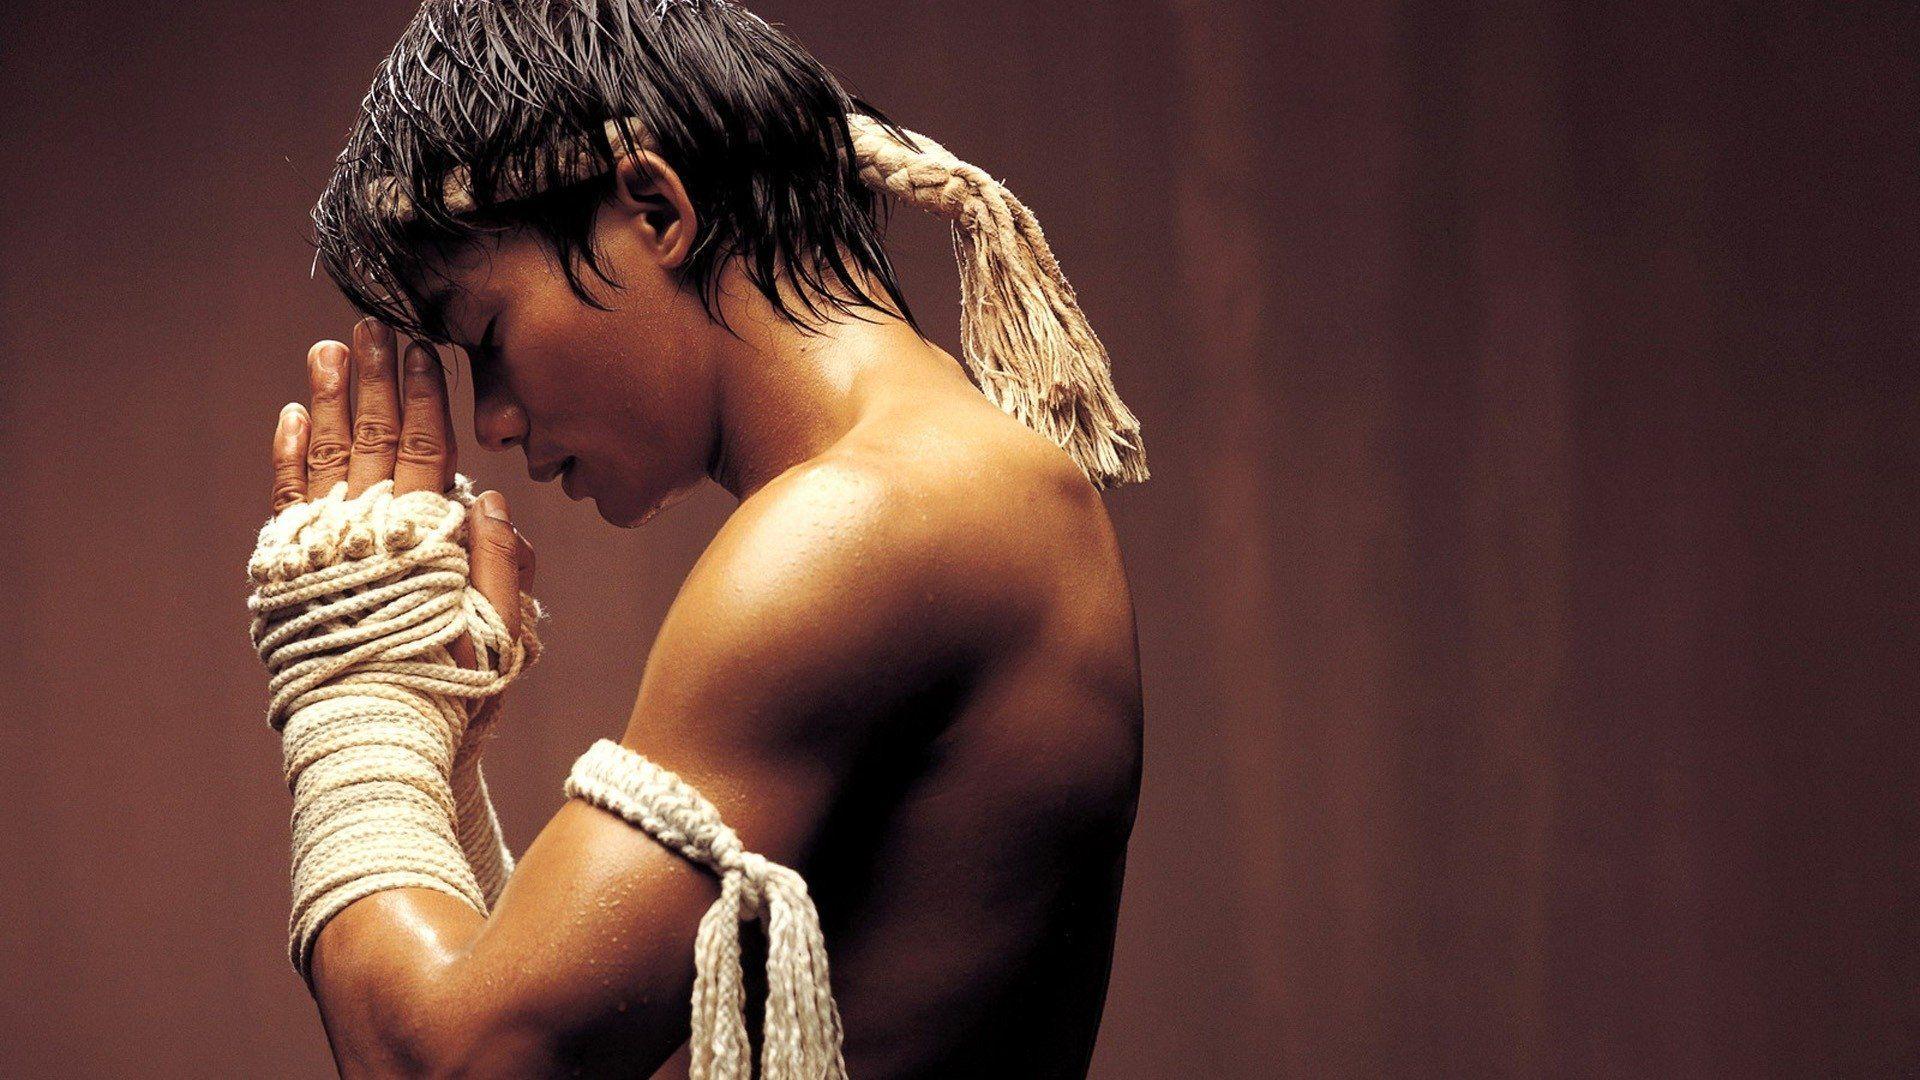 Tony Jaa HD Wallpaper and Background Image